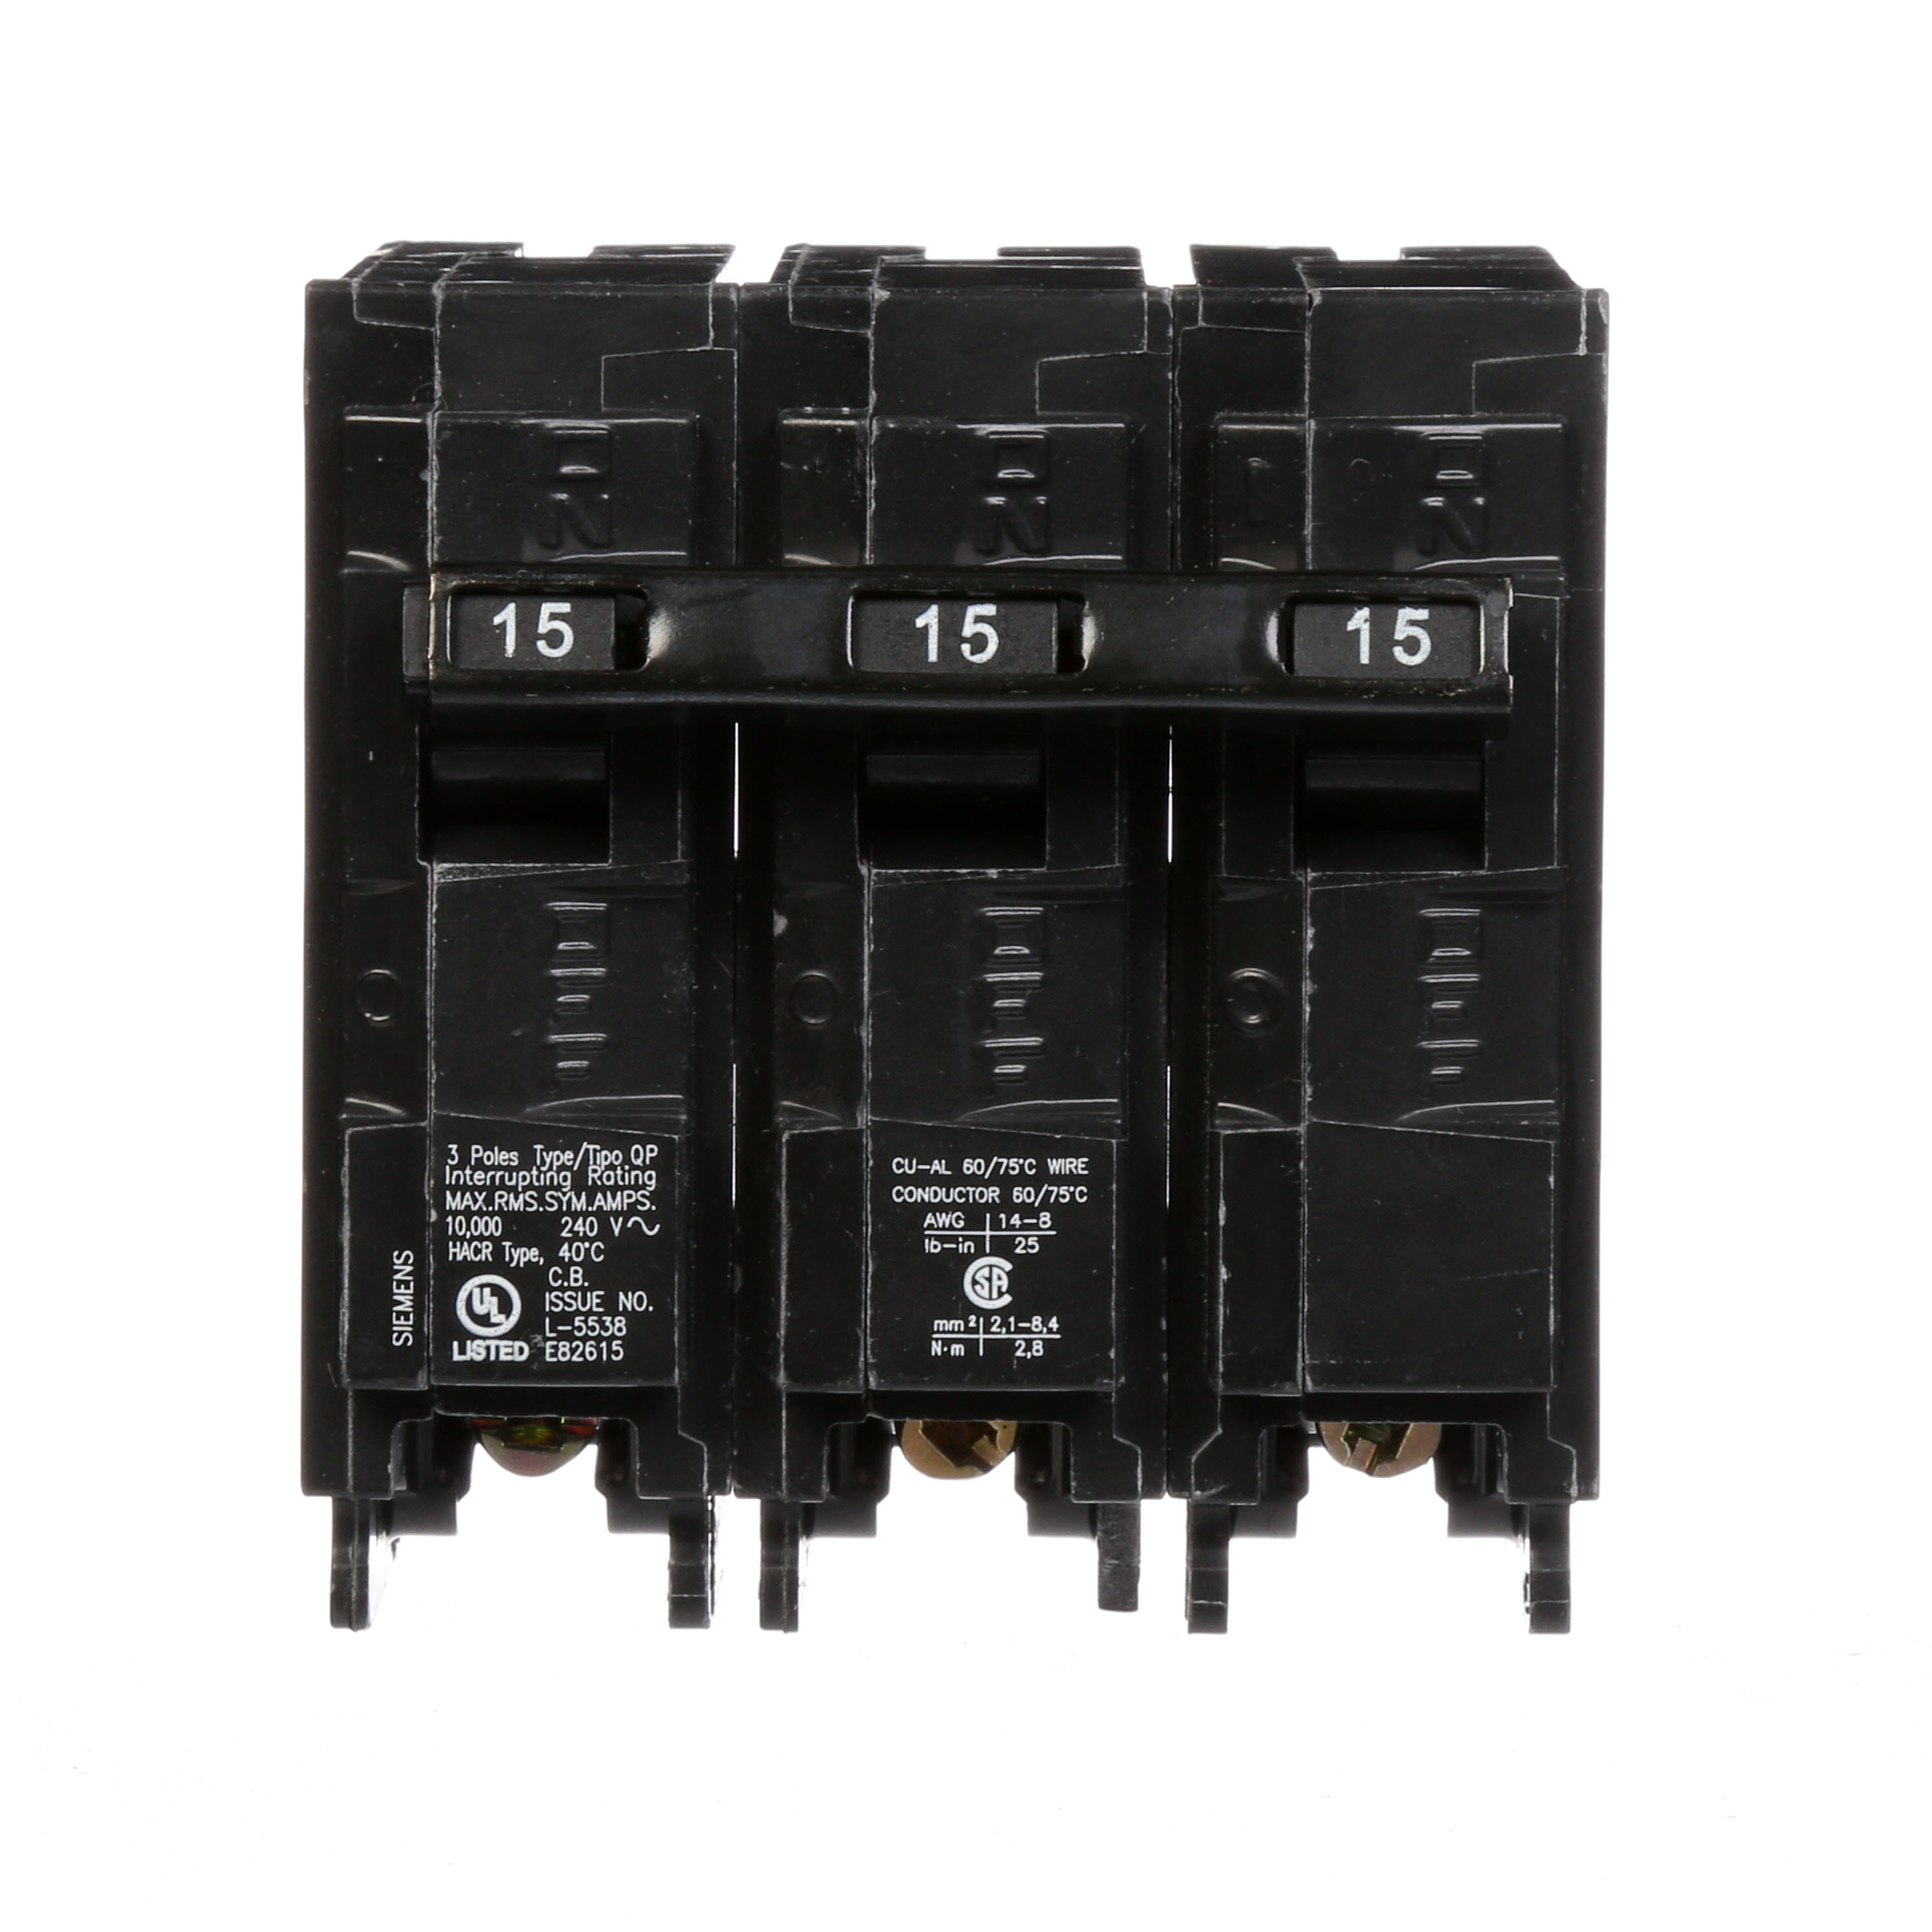 Siemens Low Voltage Residential Circuit Breakers Miniature Thermal Mag Circuit Breakers - Type QP/MP, 3-Pole, 240VAC are Circuit Protection Load Center Mains, Feeders, and Miniature Circuit Breakers. Type QP/MP Application Electrical Distribution Standard UL 489 Voltage Rating 240V Amperage Rating 15A Trip Range Thermal Magnetic Interrupt Rating 10 AIC Number Of Poles 3P